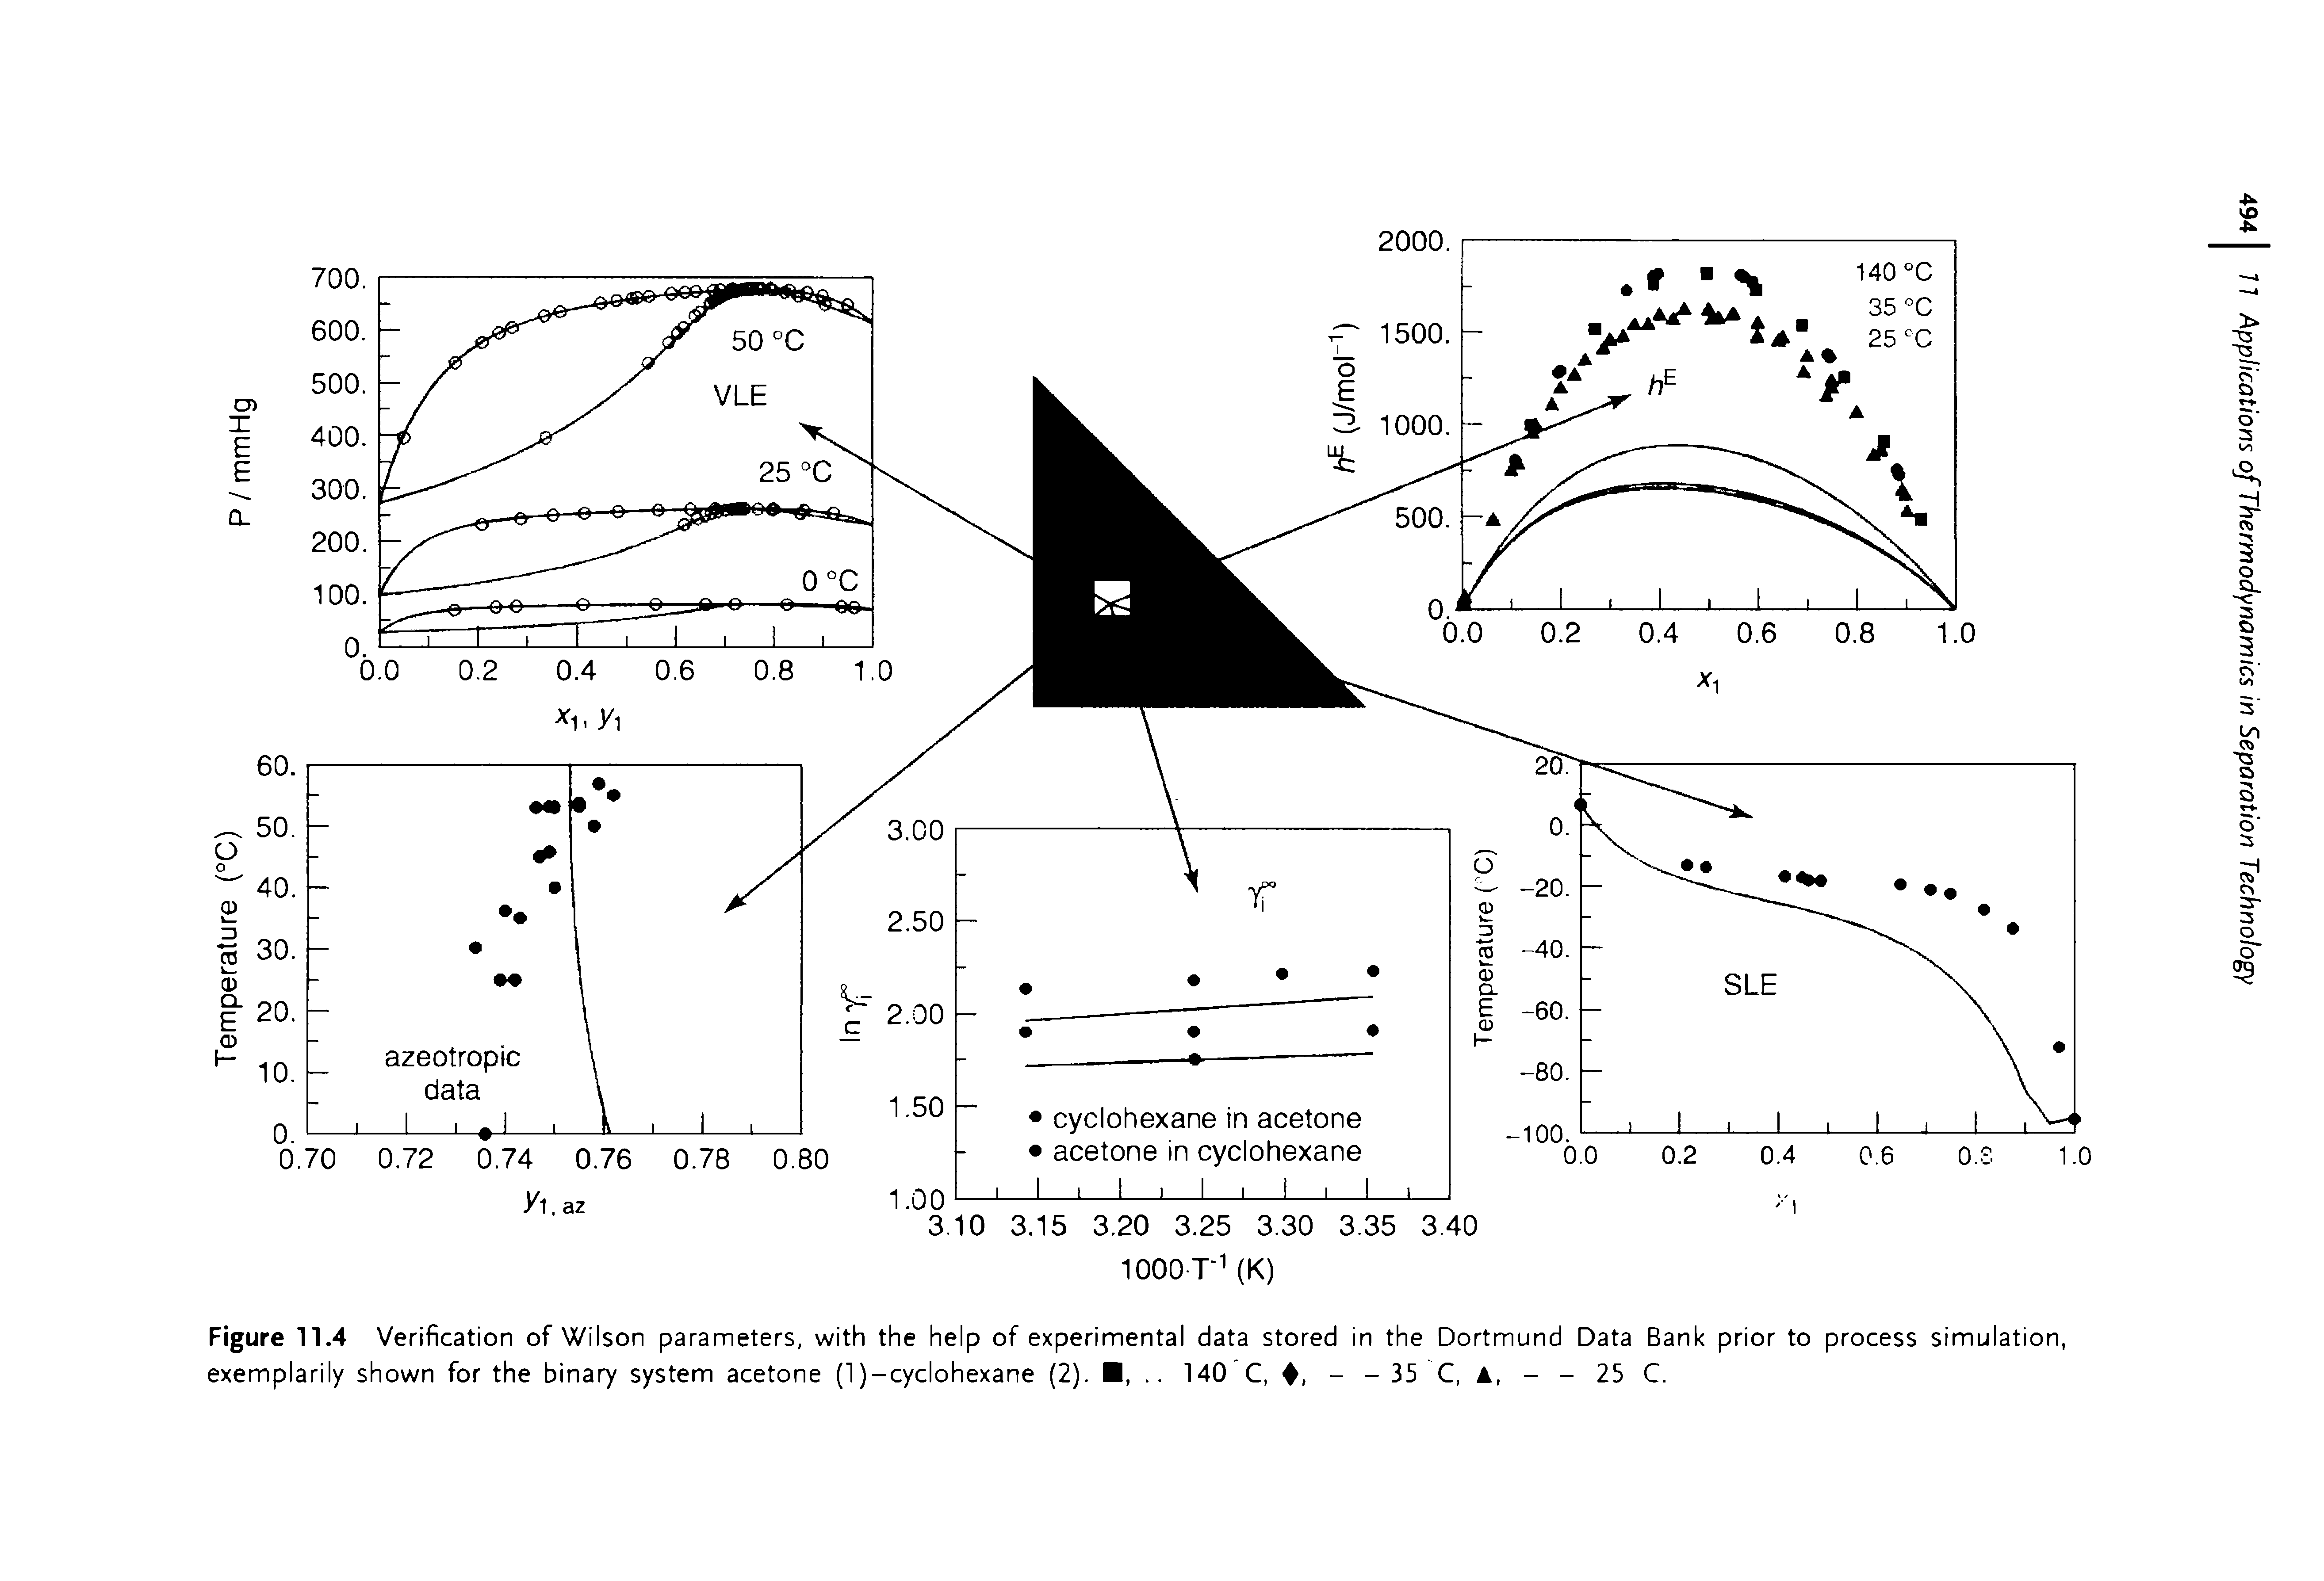 Figure 11.4 Verification of Wilson parameters, with the help of experimental data stored in the Dortmund Data Bank prior to process simulation, exemplarily shown for the binary system acetone (1 )-cyclohexane (2).. 140 C, , - - 35 C, A, - - 25 C.